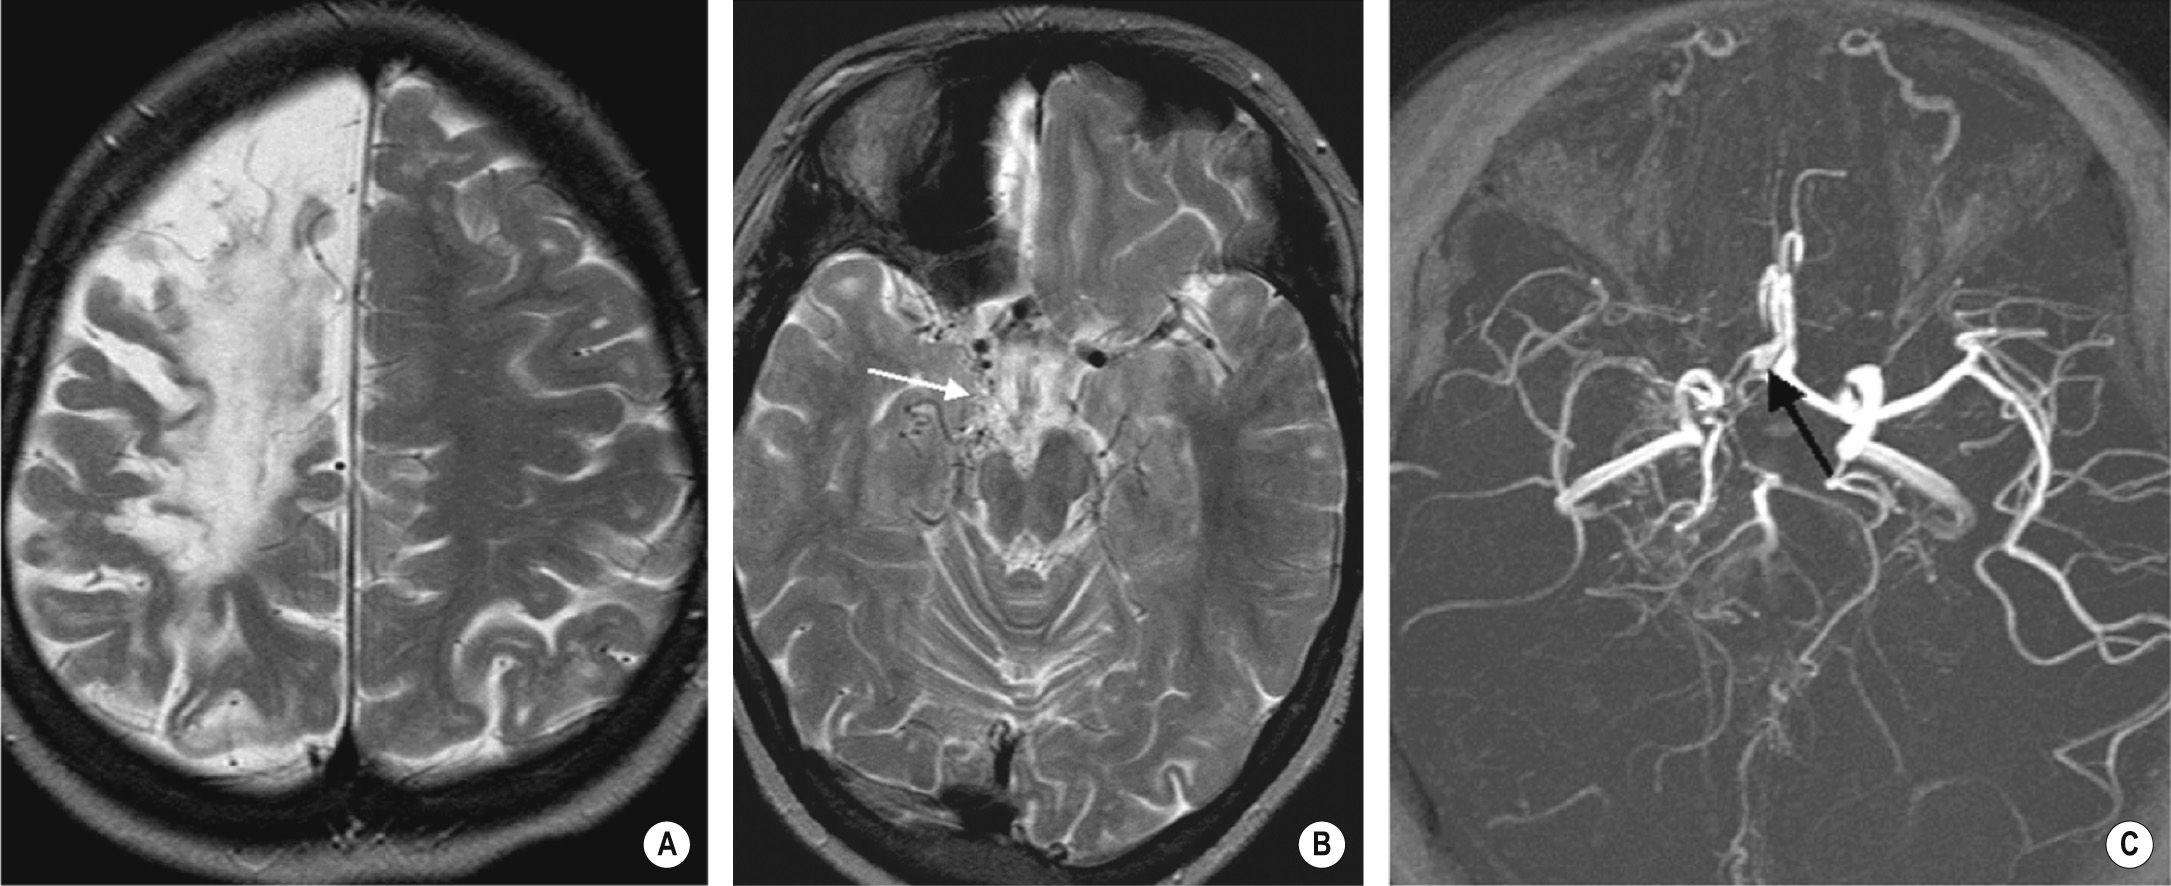 Sickle cell disease and Moyamoya syndrome. (A) Child with extensive frontal, deep and posterior watershed infarction. (B) Extensive perimesencephalic ‘Moyamoya’ collaterals (arrow) and attenuated right middle cerebral artery (MCA) flow voids. (C) Compressed maximum intensity projection image shows narrowed terminal internal carotid artery (ICA), reduced filling of right MCA and A1 segment of the anterior cerebral artery. There is an aneurysm at the A1/anterior communicating artery (ACOM) junction (arrow). *